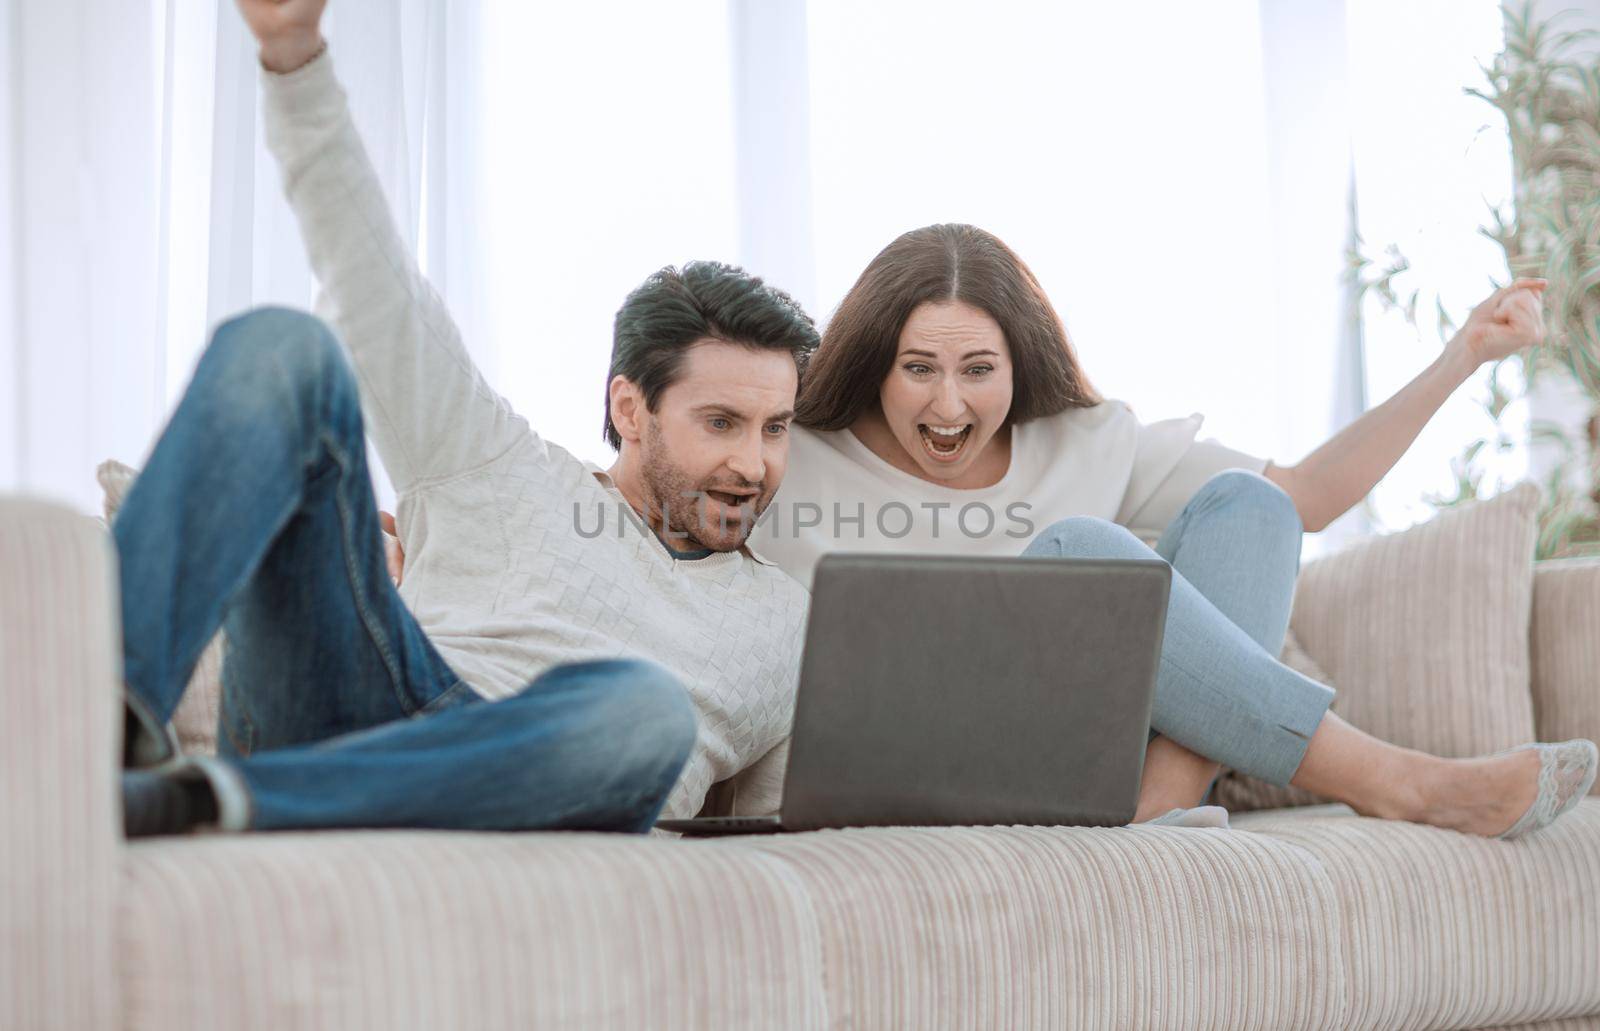 young couple watching TV shows on their laptop.people and technology